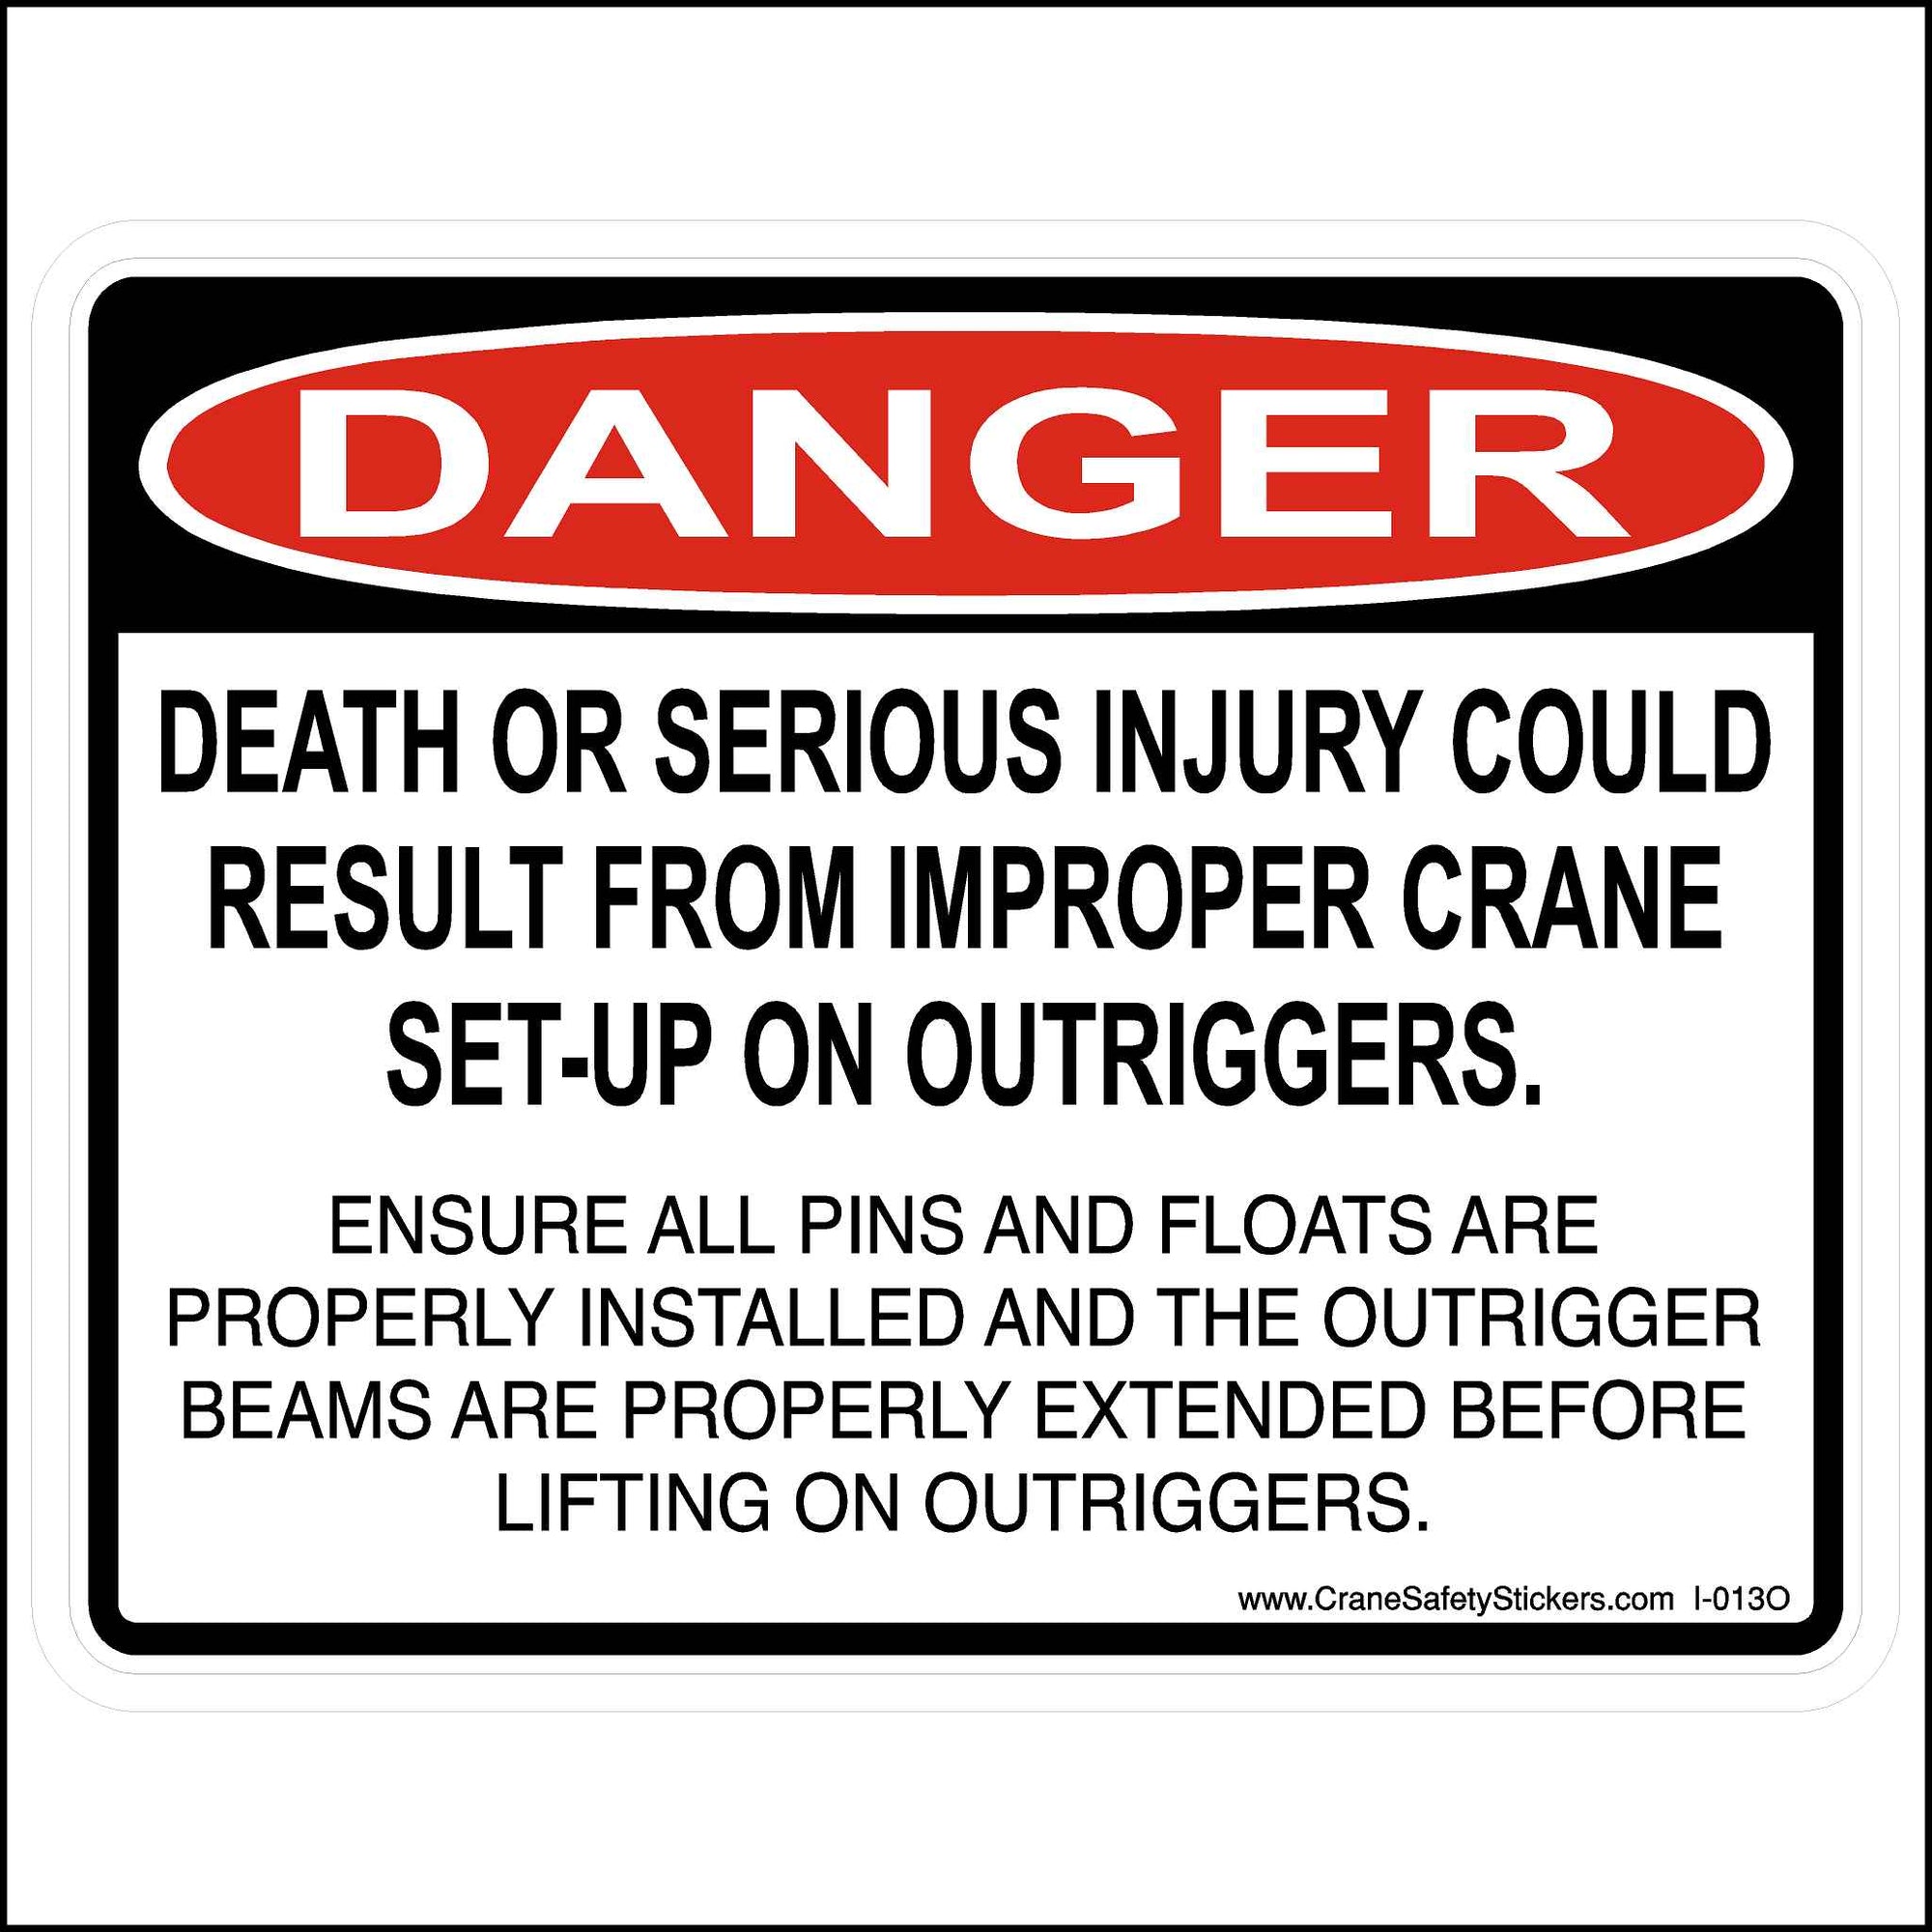 Our improper crane setup with osha header is printed with.  DANGER (OSHA HEADER) Death or serious injury could result from improper crane set-up on outriggers. ENSURE ALL PINS AND FLOATS ARE PROPERLY INSTALLED AND THE OUTRIGGER BEAMS ARE PROPERLY EXTENDED BEFORE LIFTING ON OUTRIGGERS.